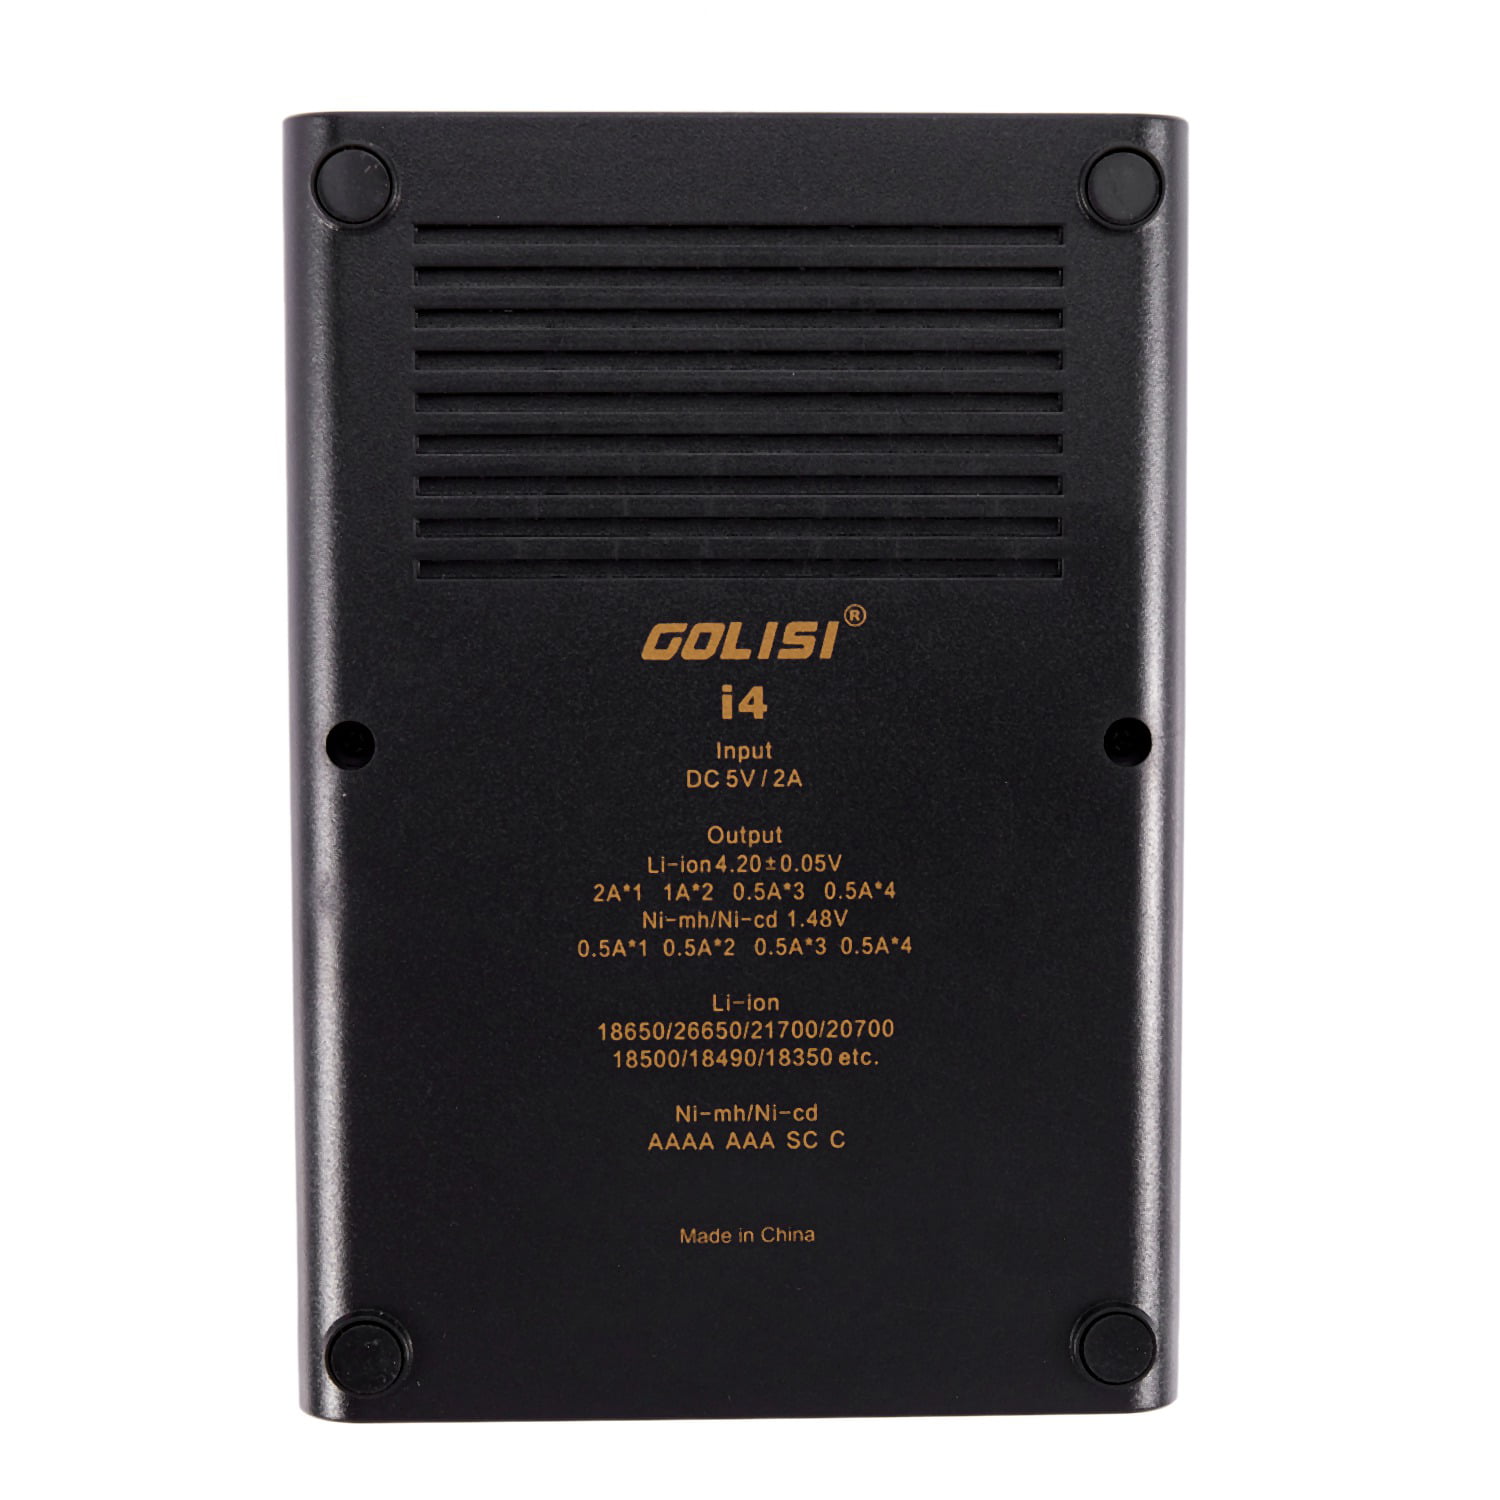 GOLISI S6 Intelligent Charger Safety Smart  Big LCD display For Batteries 6 Slot